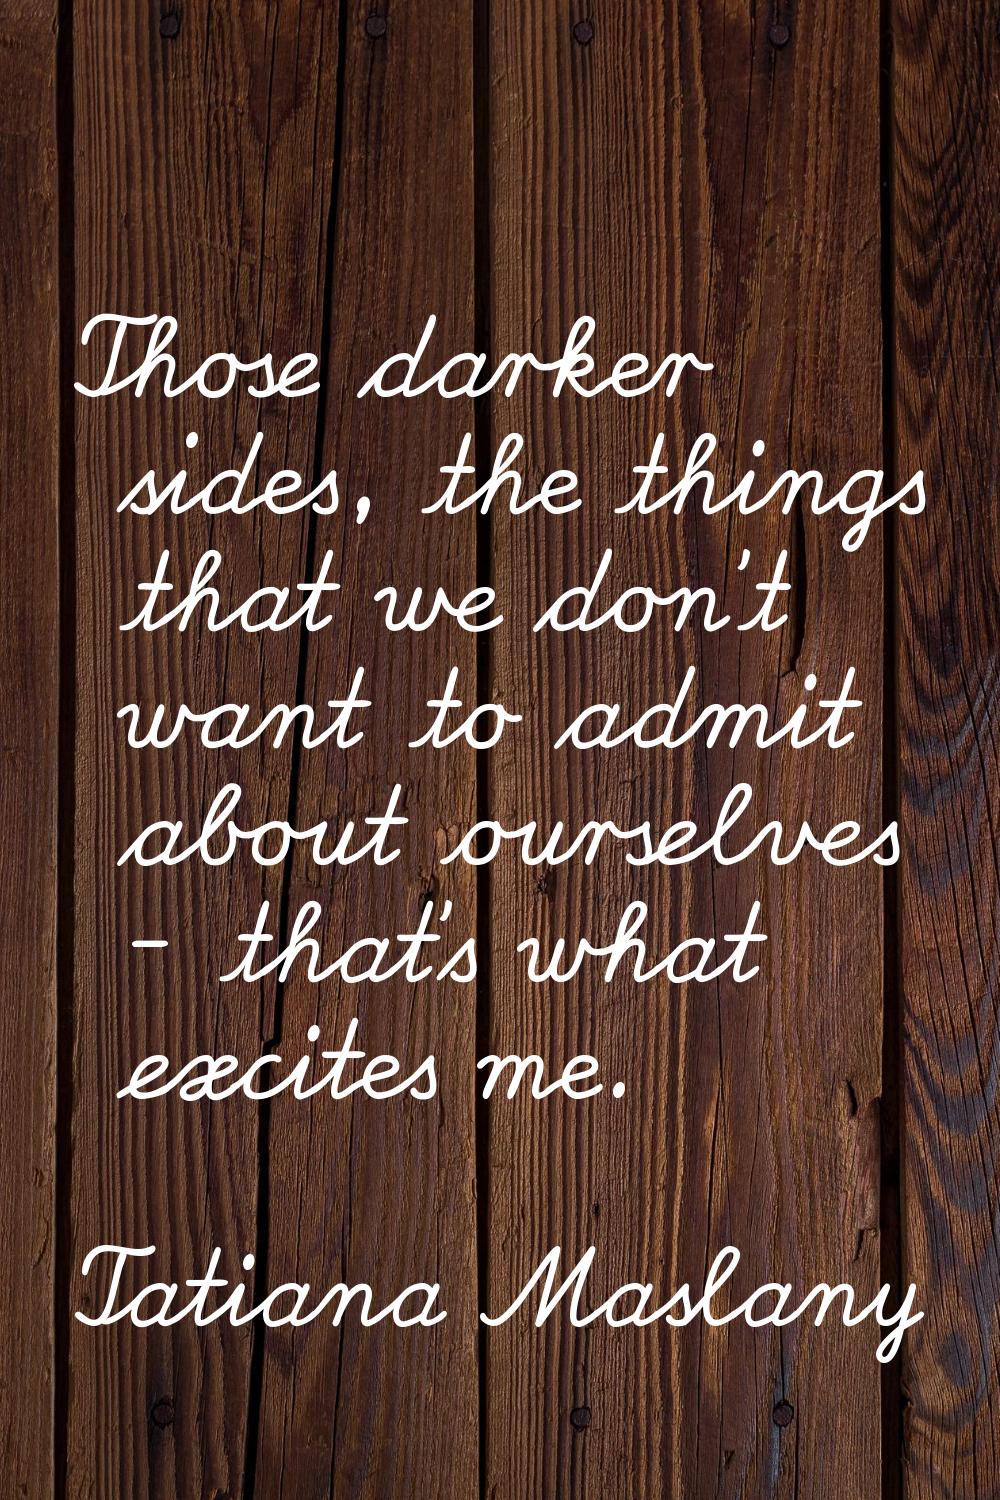 Those darker sides, the things that we don't want to admit about ourselves - that's what excites me